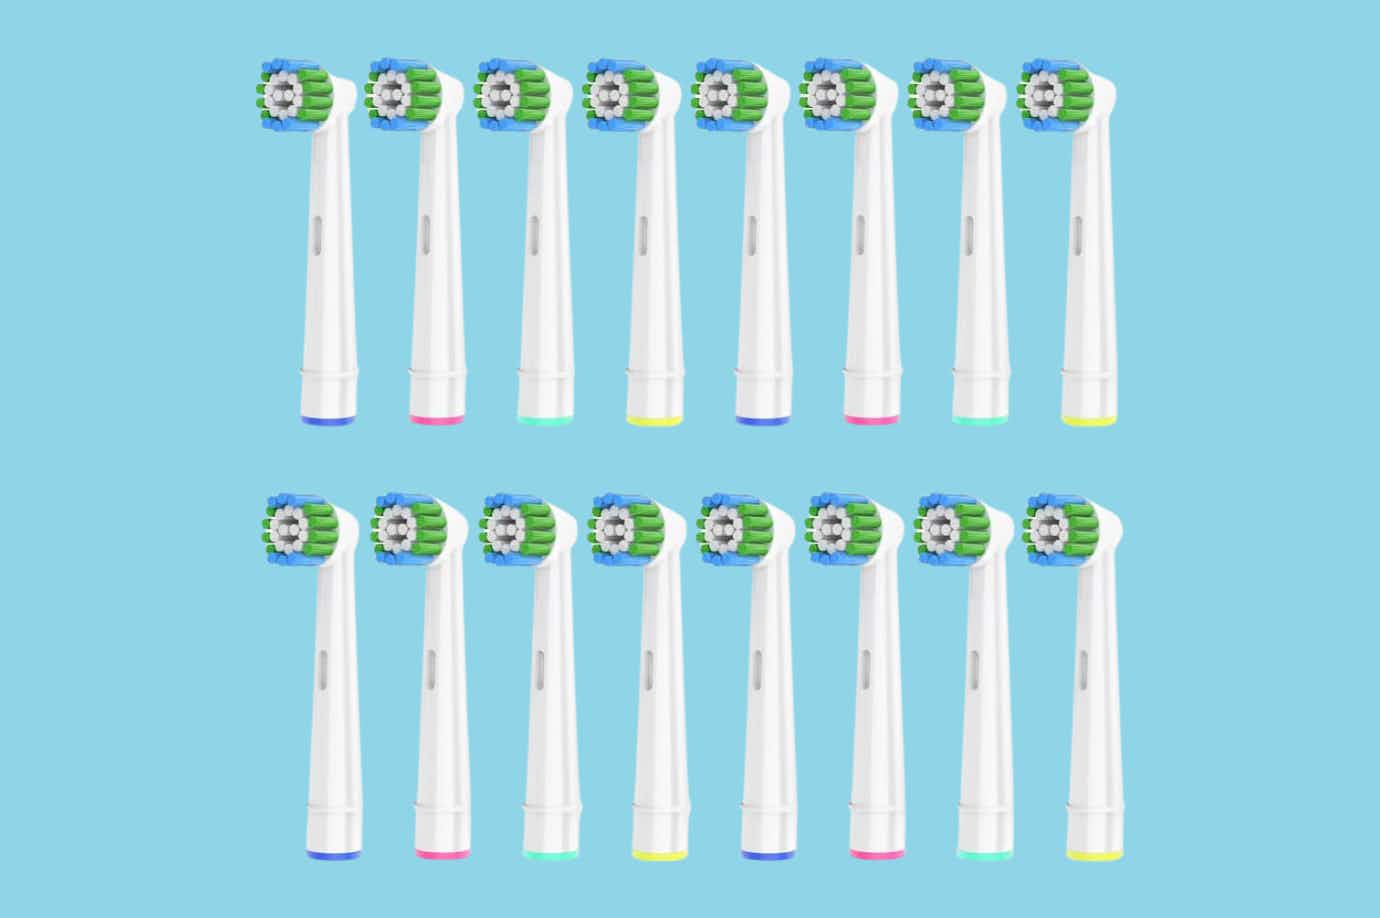 Replacement Toothbrush Heads for Oral-B, as Low as $2.99 on Amazon